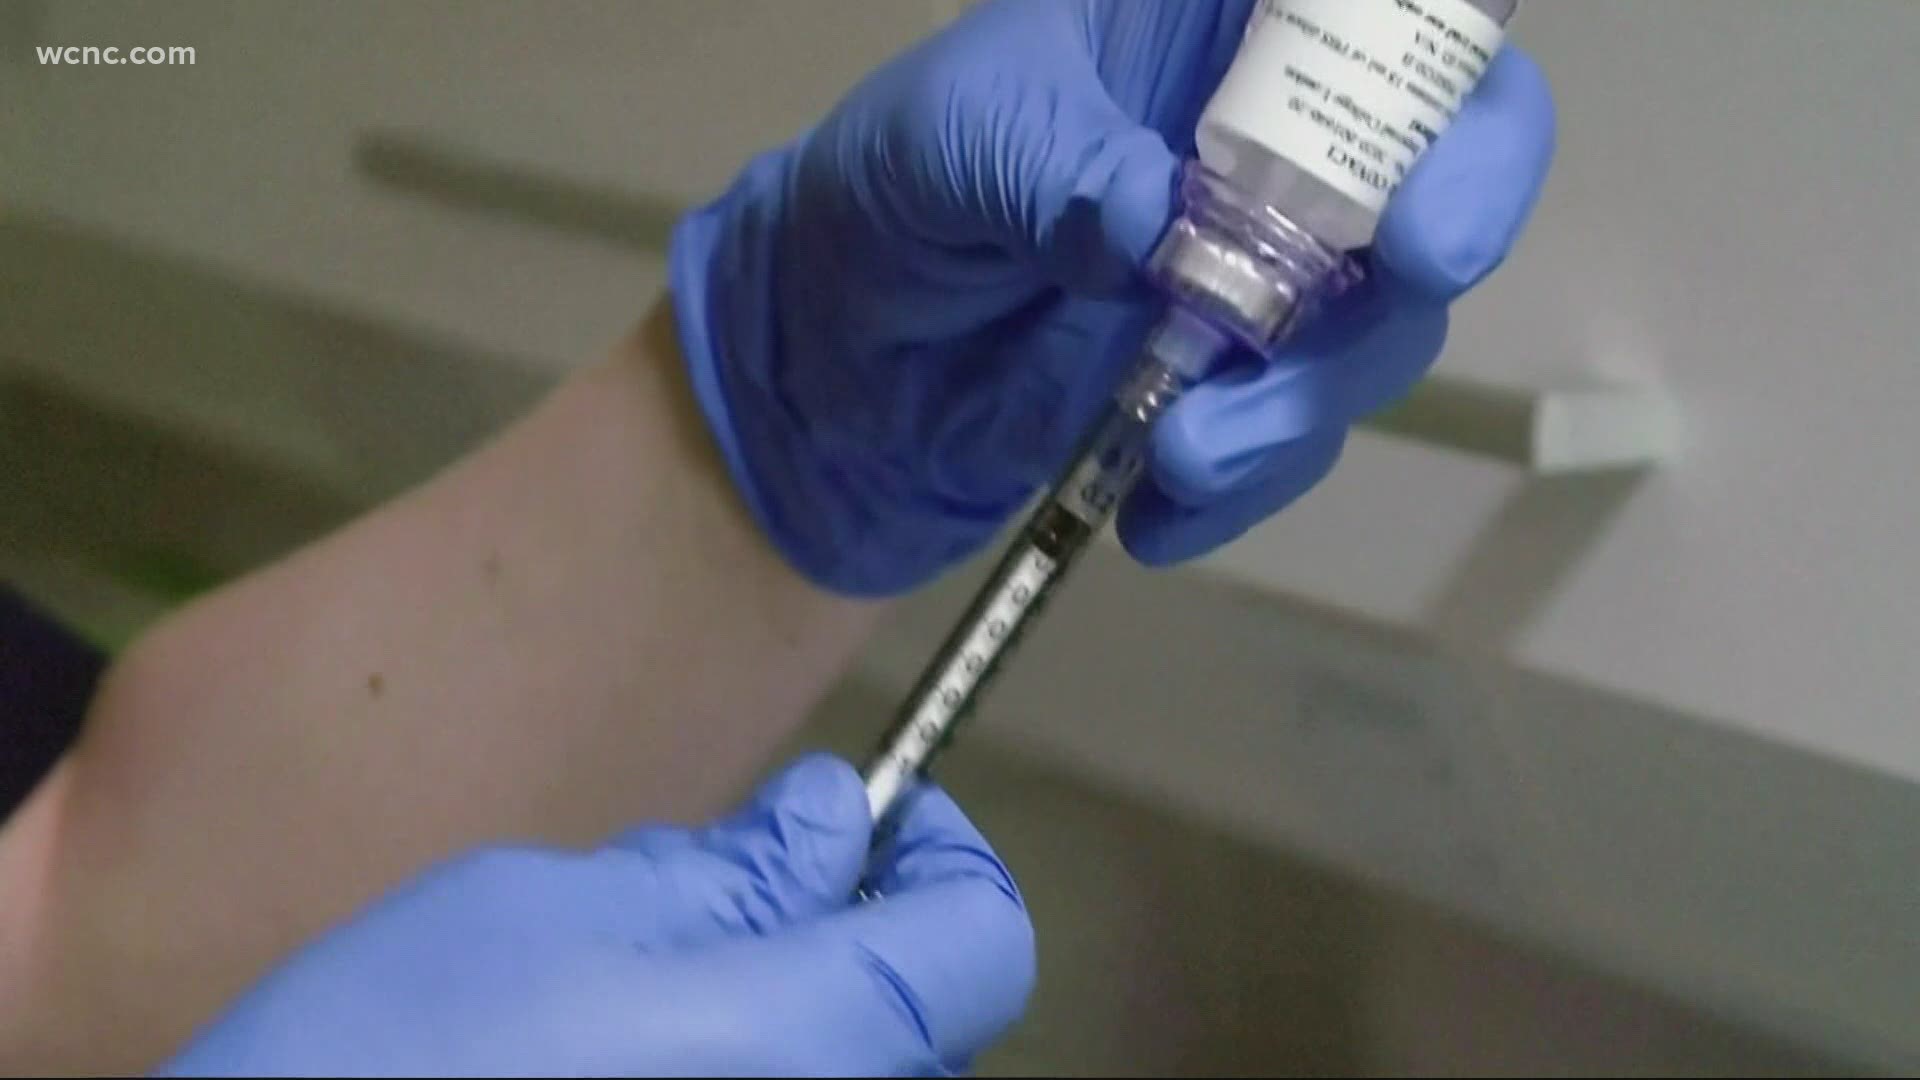 Starting Monday, all adults 65 & older, regardless of health condition or living situation, became eligible for COVID-19 vaccinations in South Carolina.